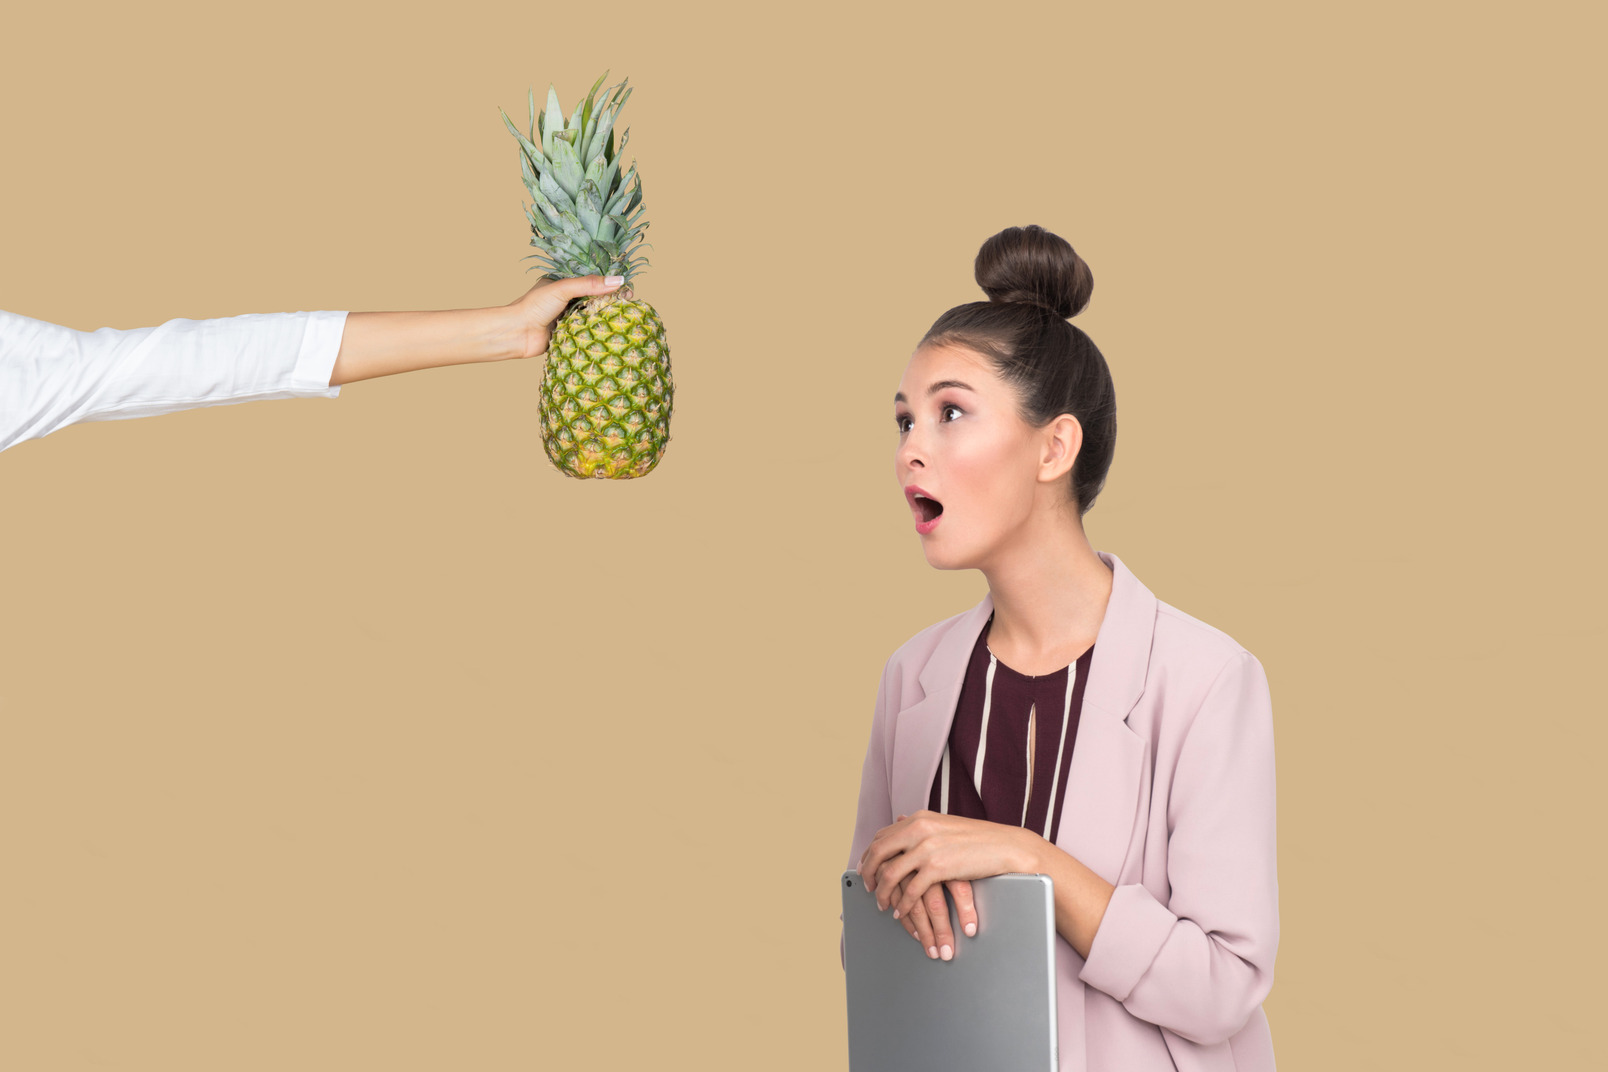 When you have to do advertisement about ananas till tomorrow